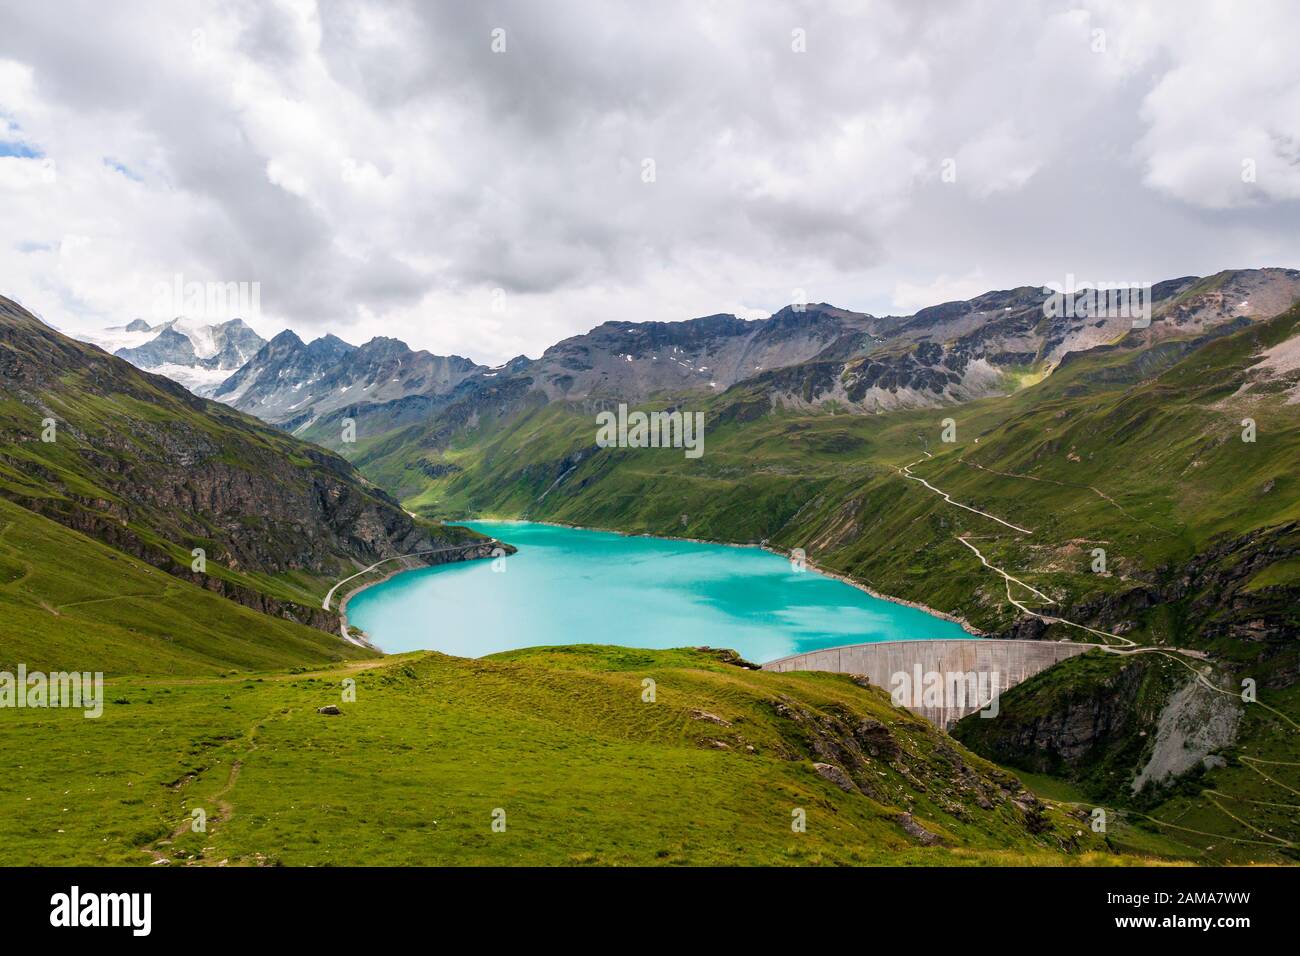 View on the reservoir Lac de Moiry and the concrete dam surrounded by green alpine pastures high up in the Pennine Alps on cloudy day in summer. Grime Stock Photo